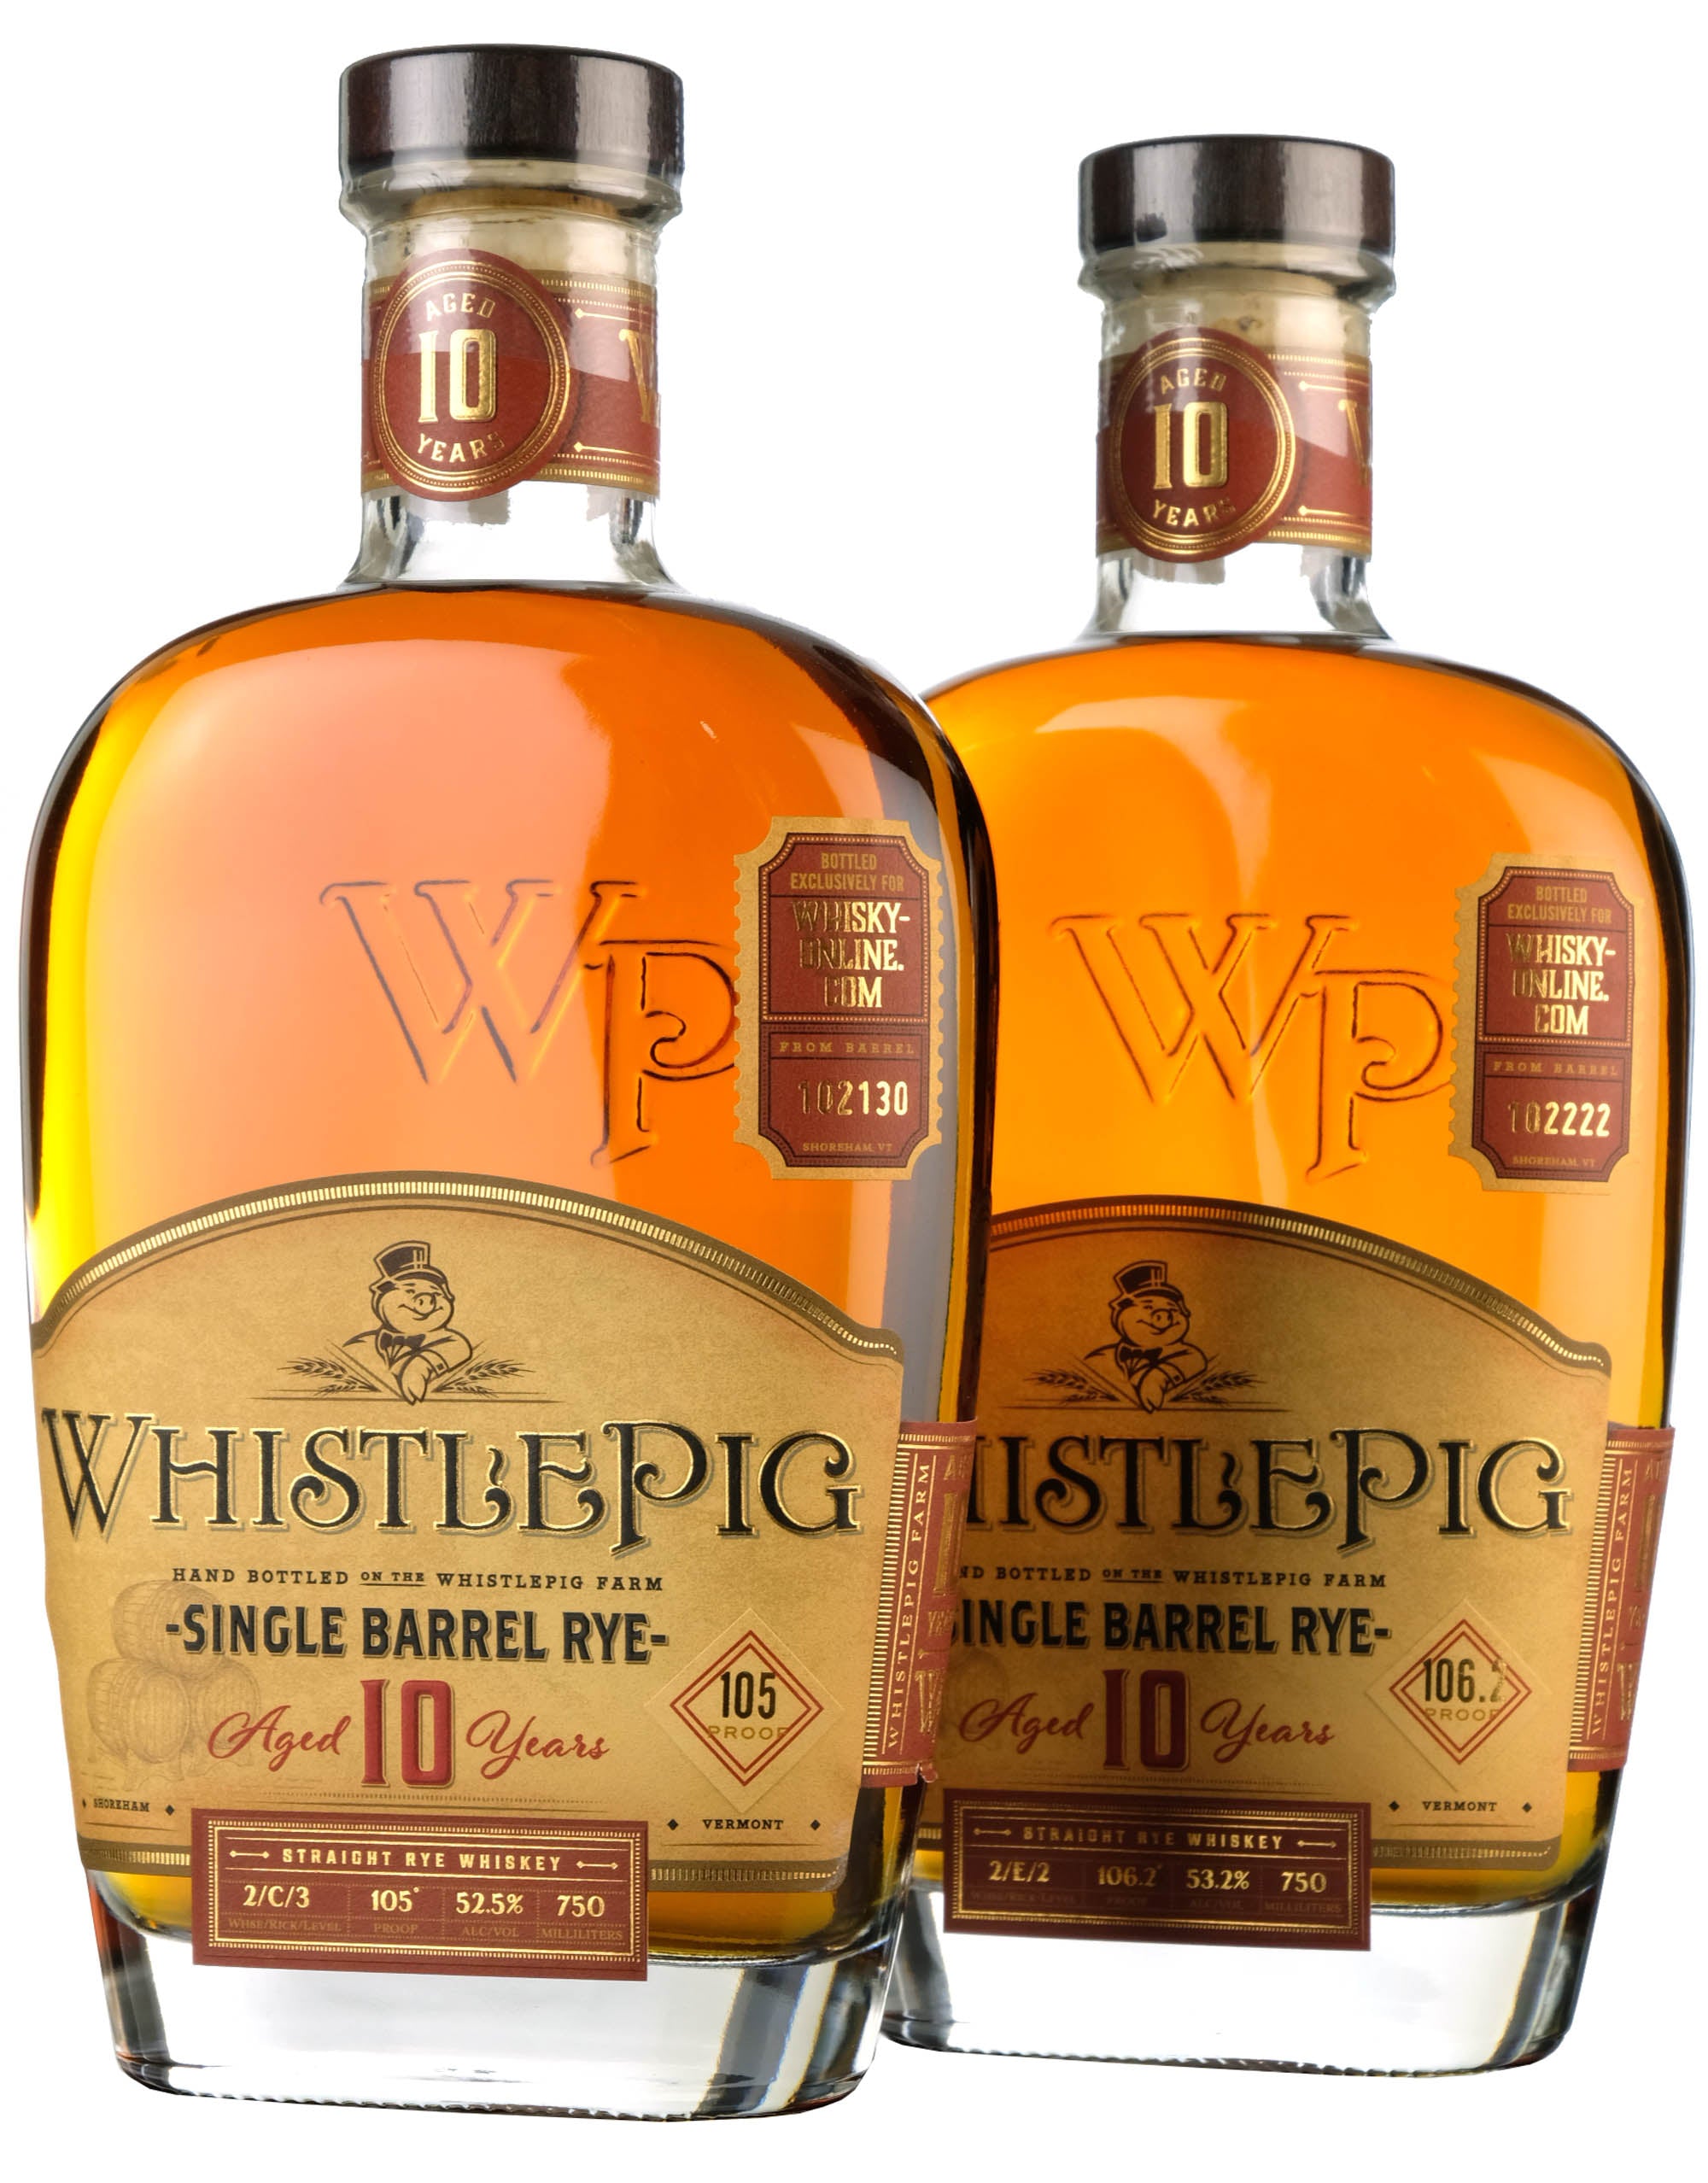 WhistlePig Rye Whiskey 10 Year Old | Barrel Pick 102130 | Whisky-Online Exclusive